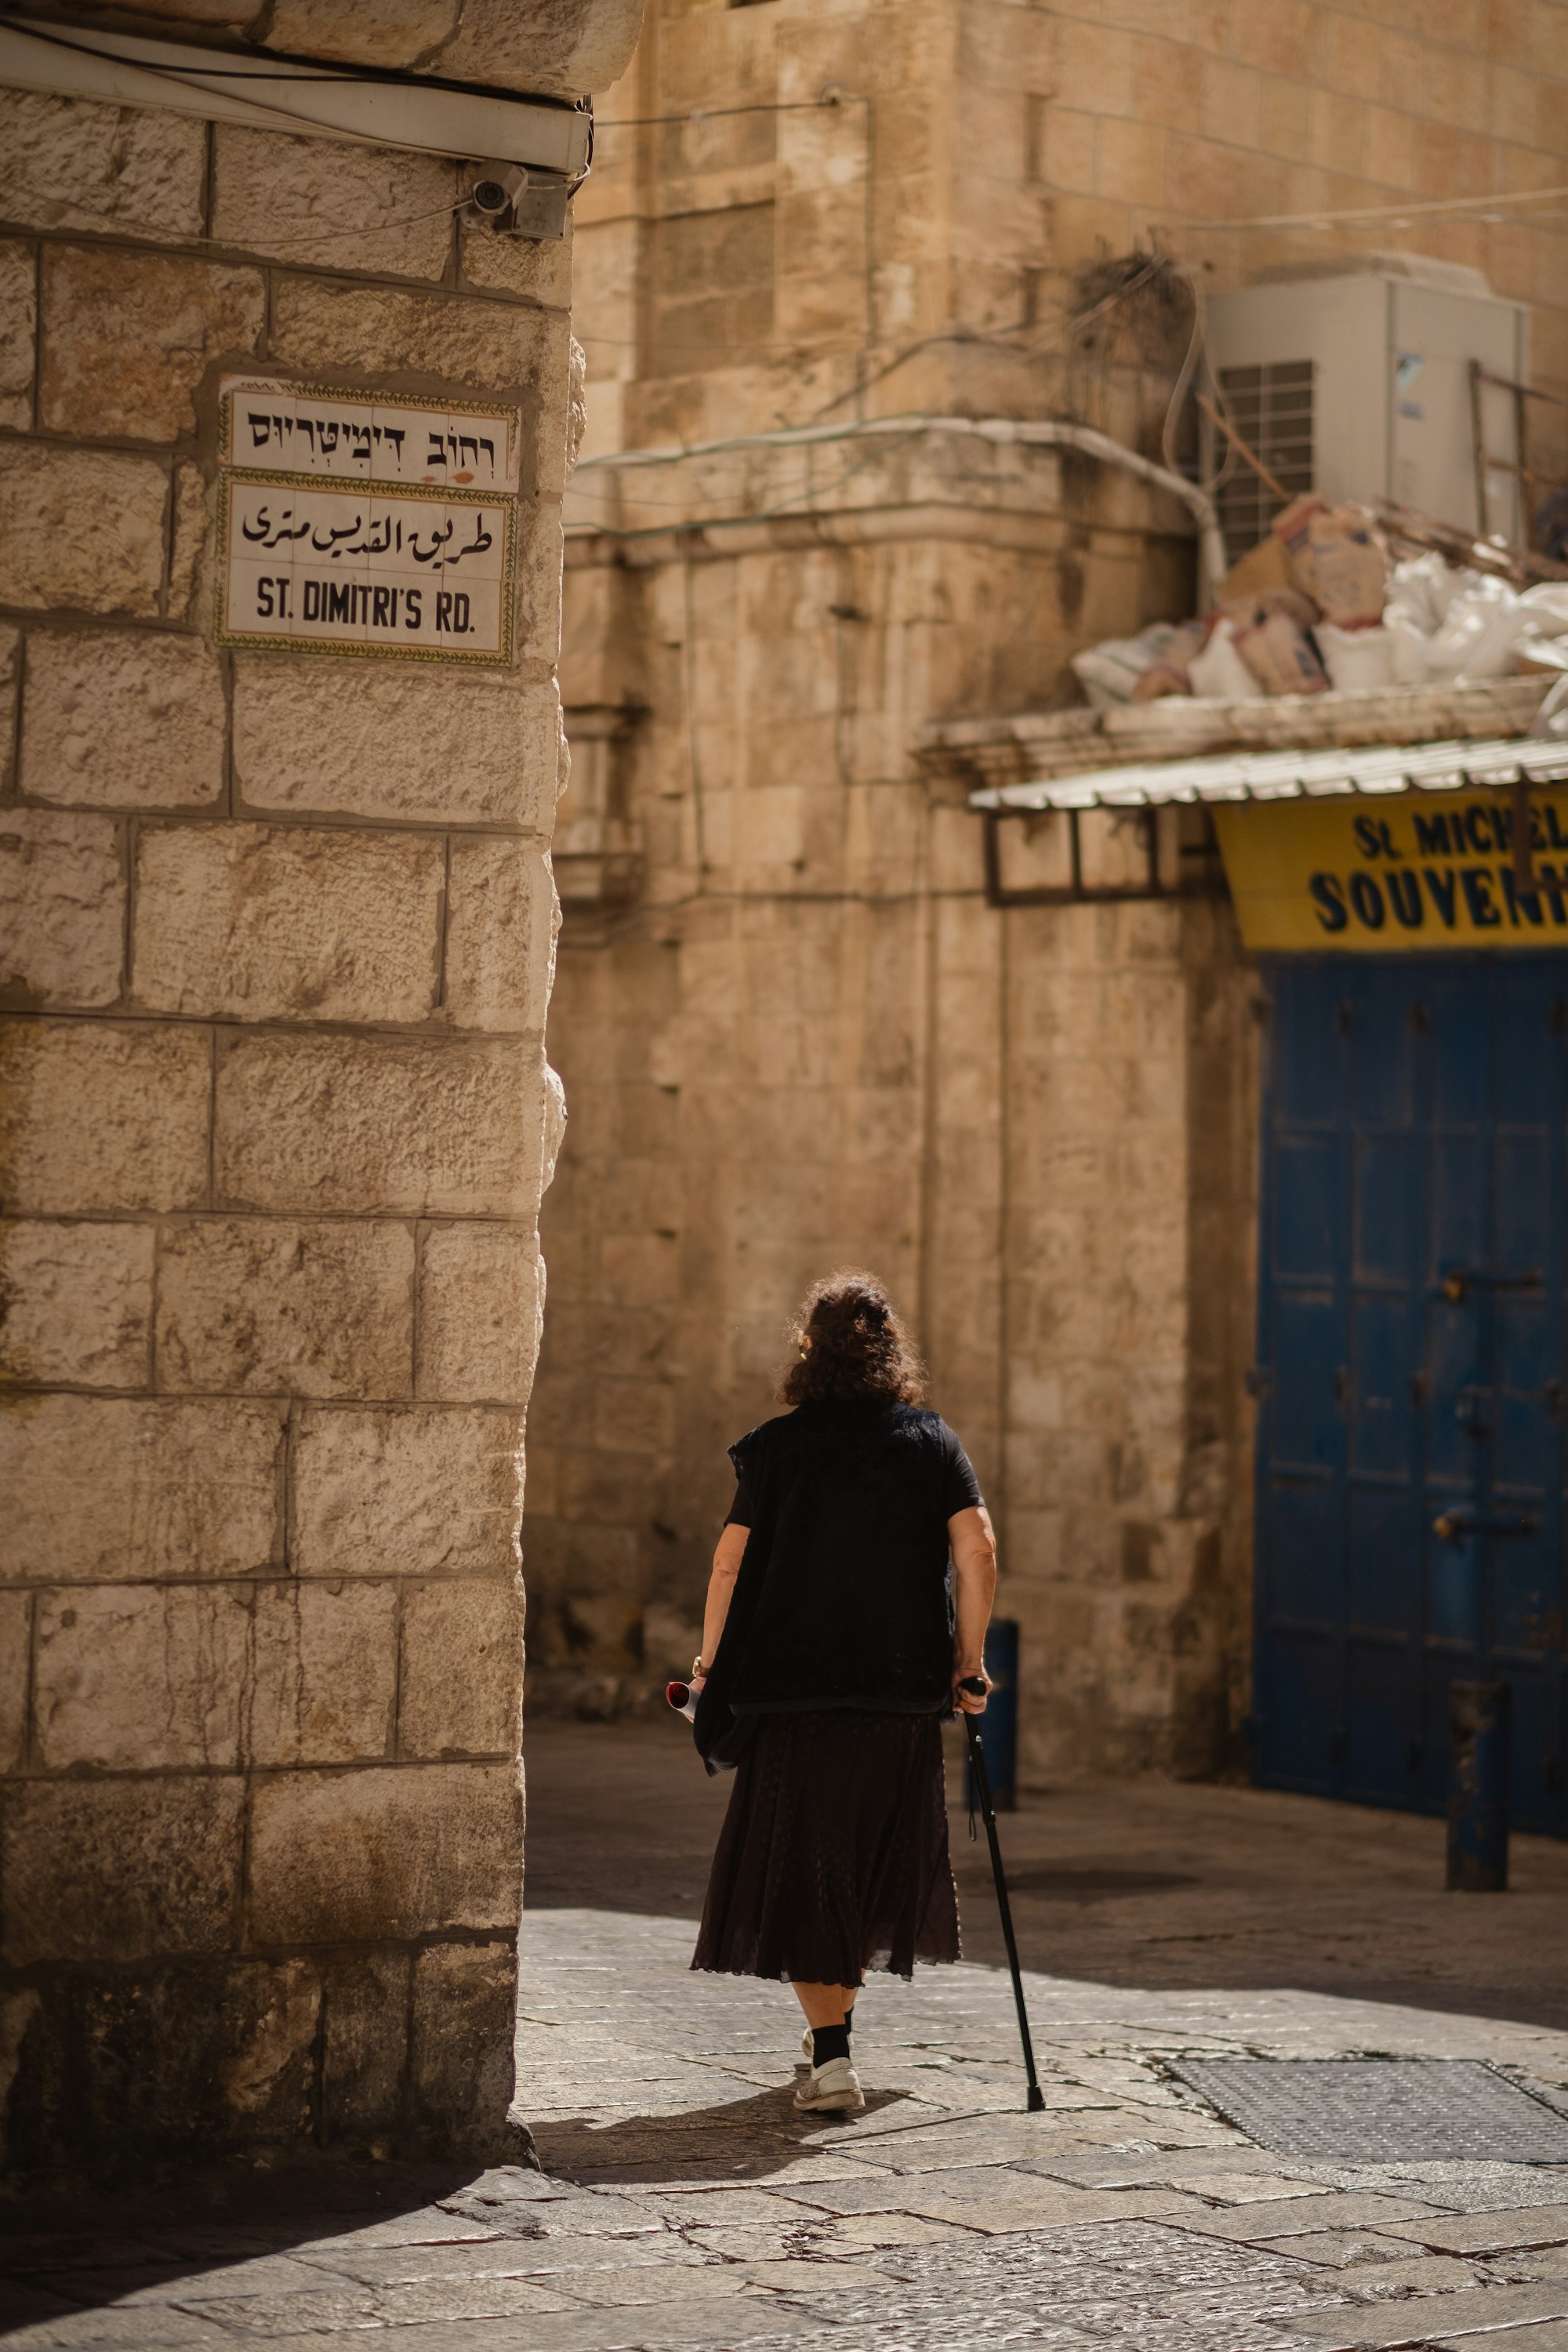 In the streets of the Old City of Jerusalem.